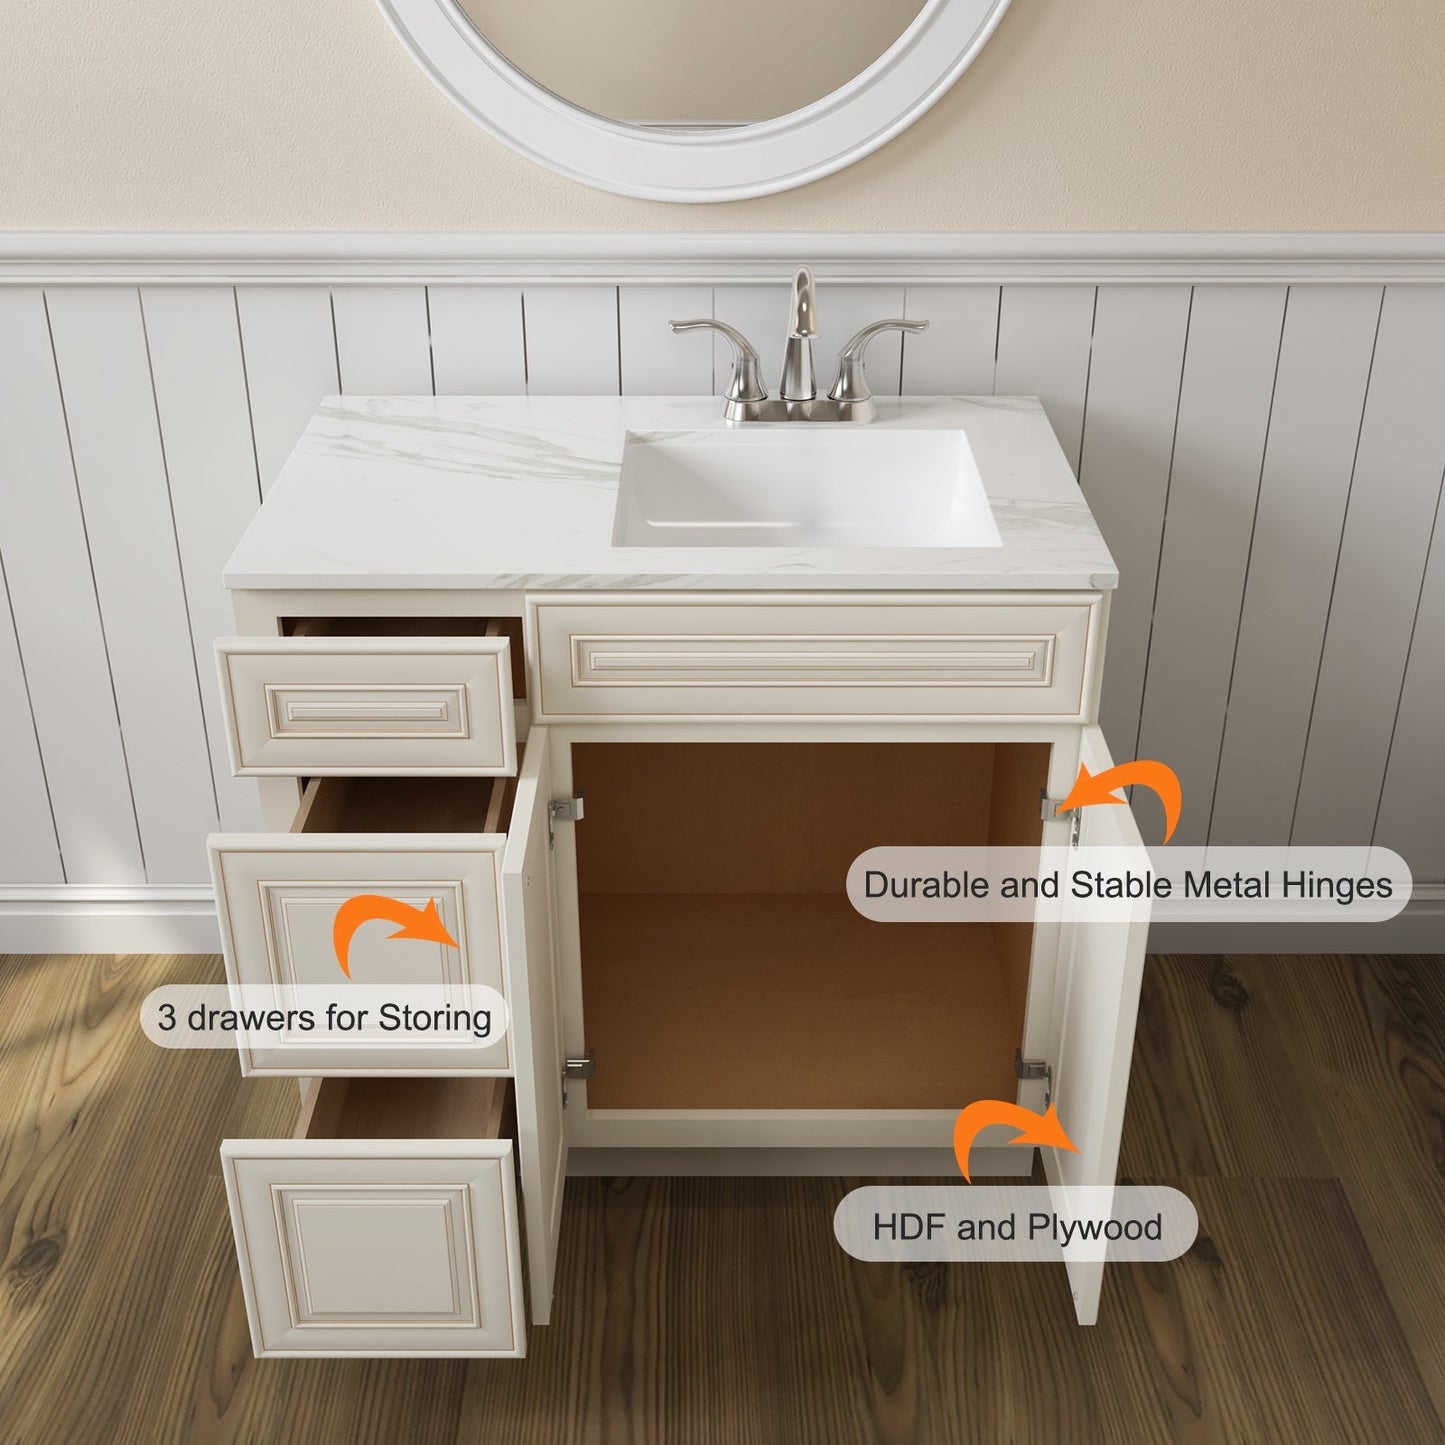 Bath Birch Solid Wood Vanity Cabinet without Top V3621DL